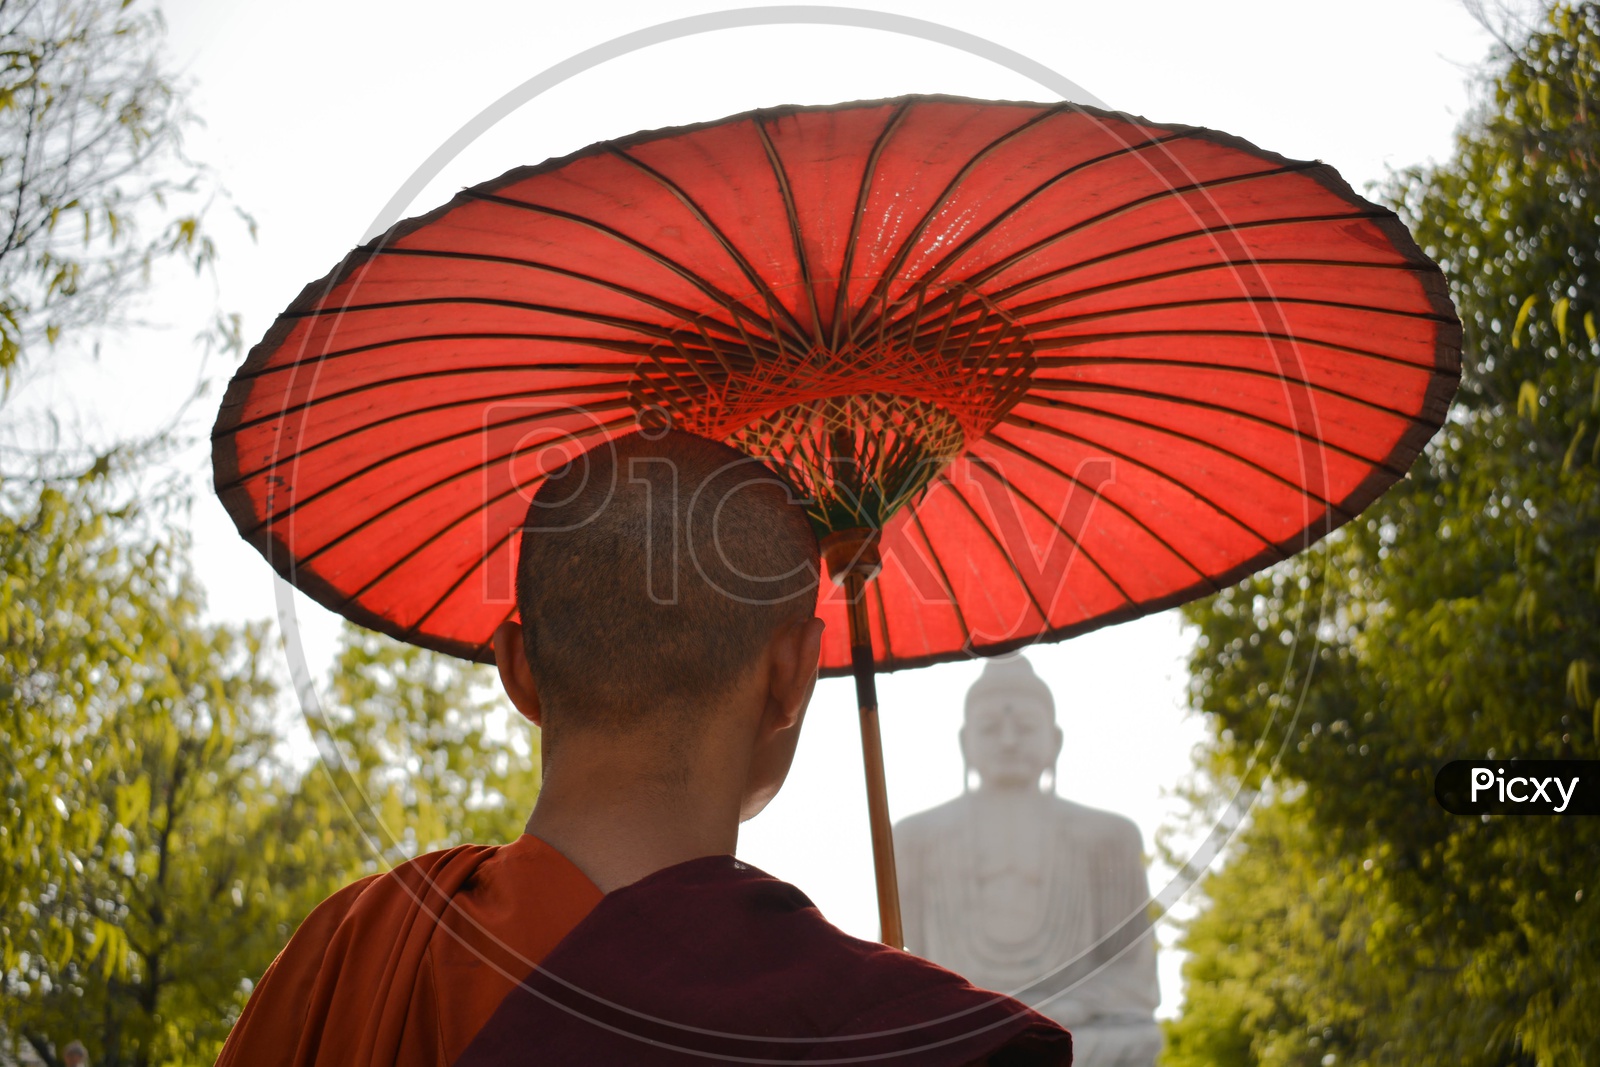 Buddhist Monks With Red Umbrella